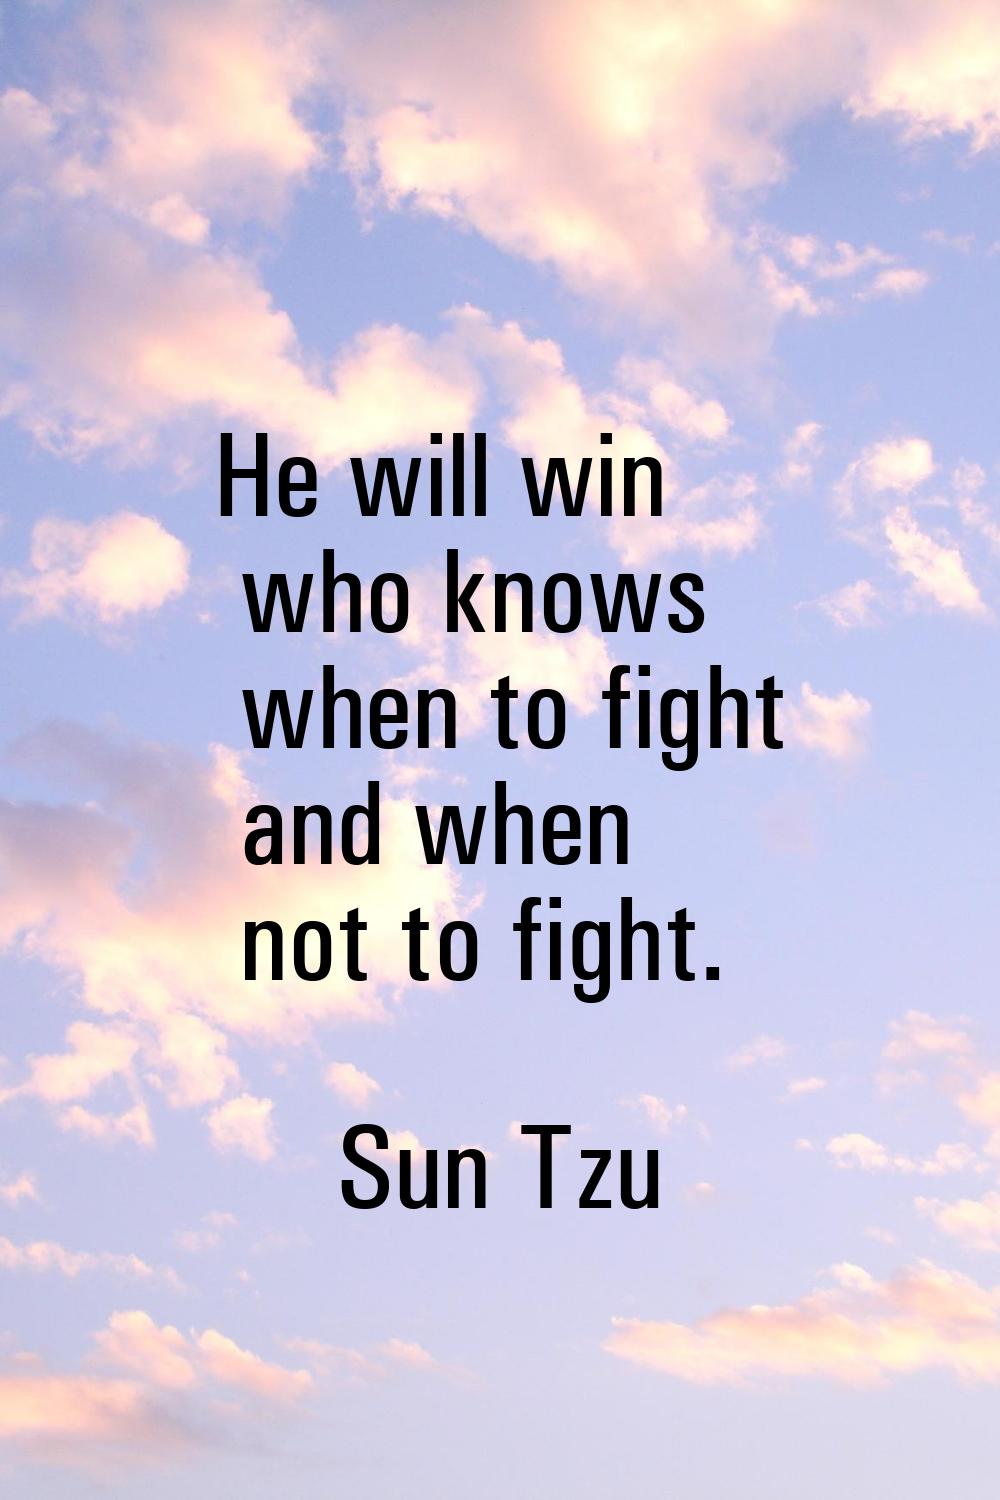 He will win who knows when to fight and when not to fight.